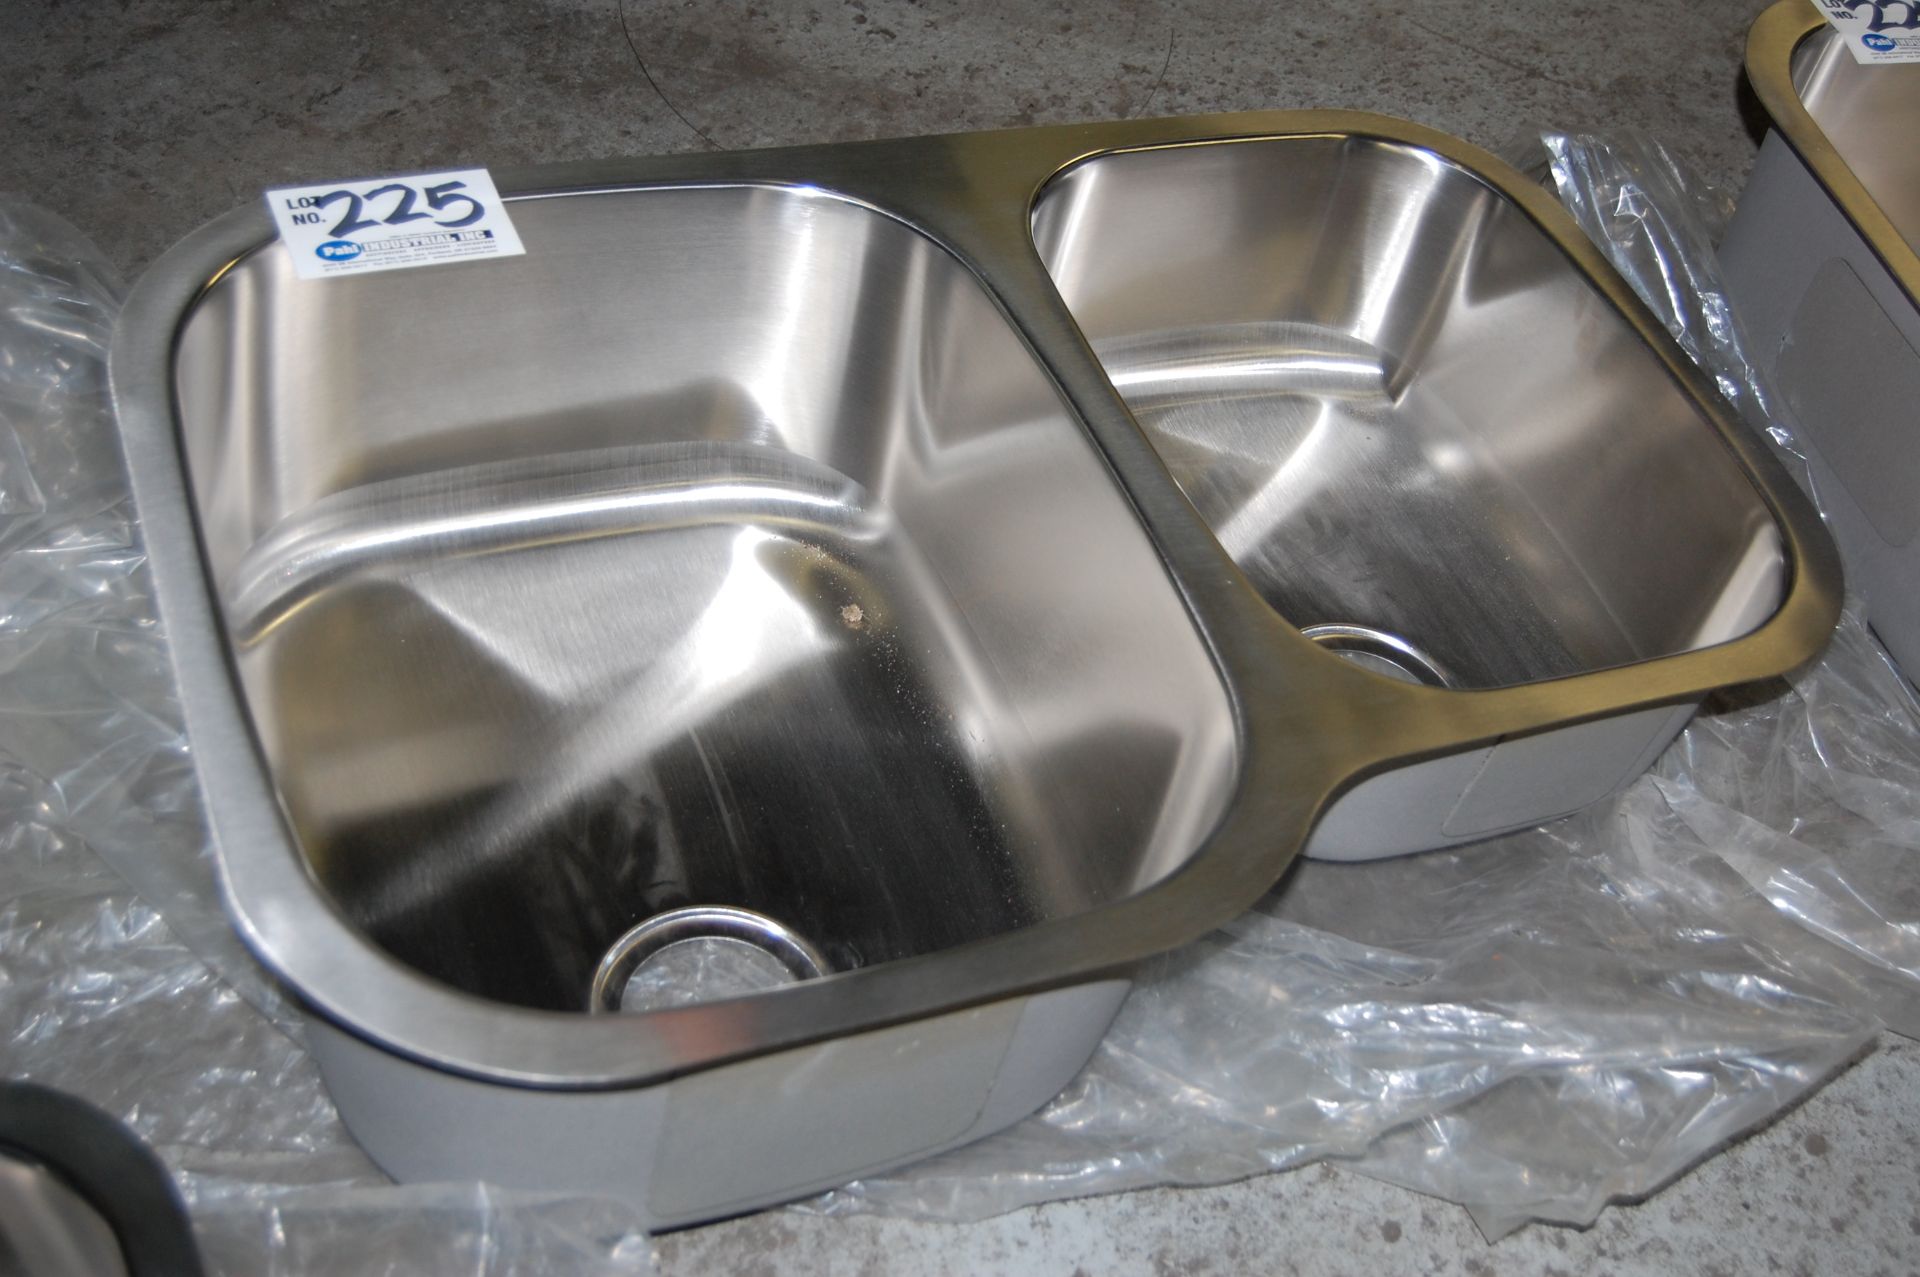 Stainless Steel Double Well Sink 31 1/2" x 20 1/2"